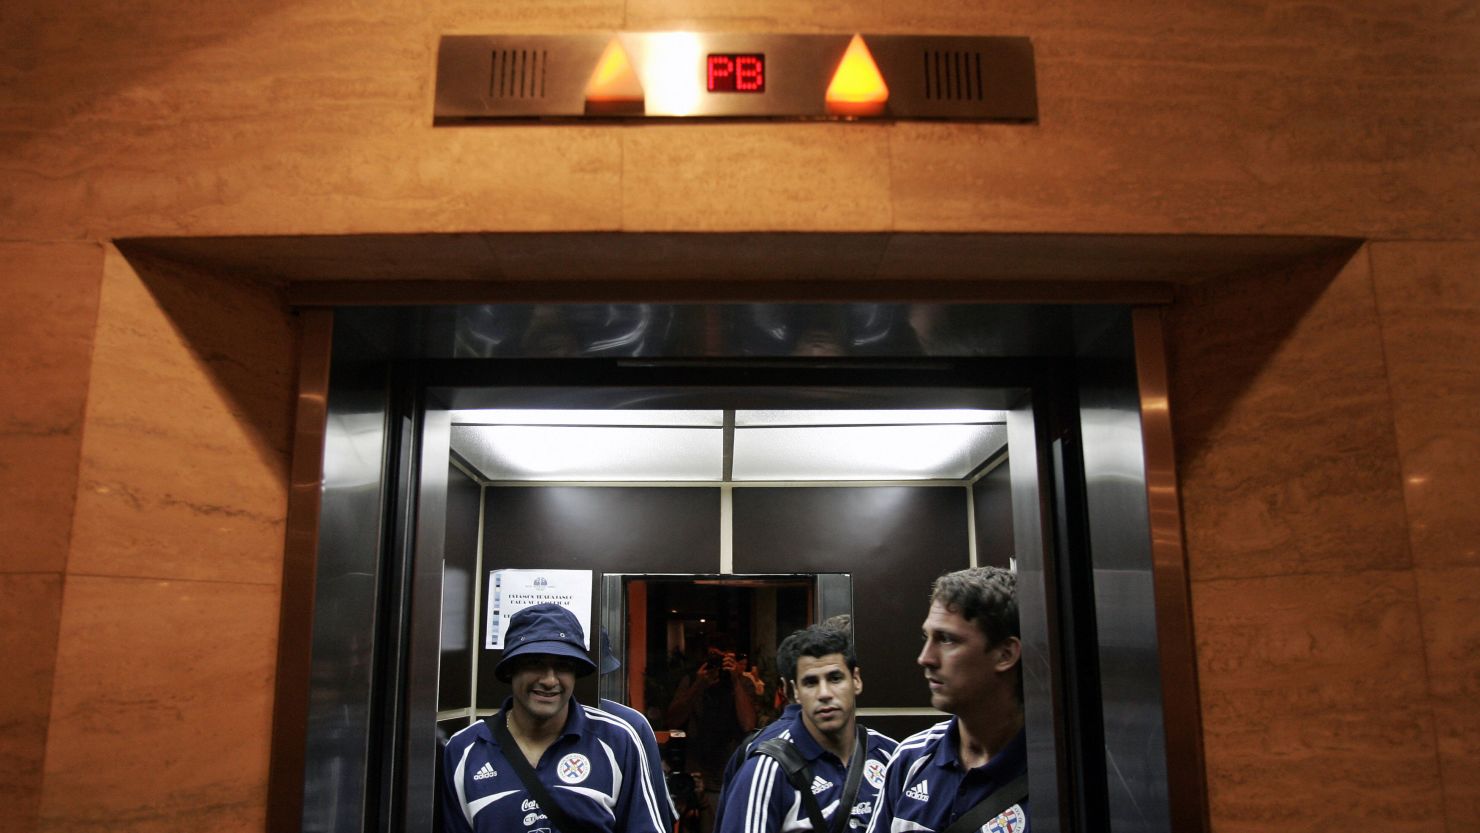 Rooms next to elevators or among a big group such as a sports team or wedding party are not ideal.